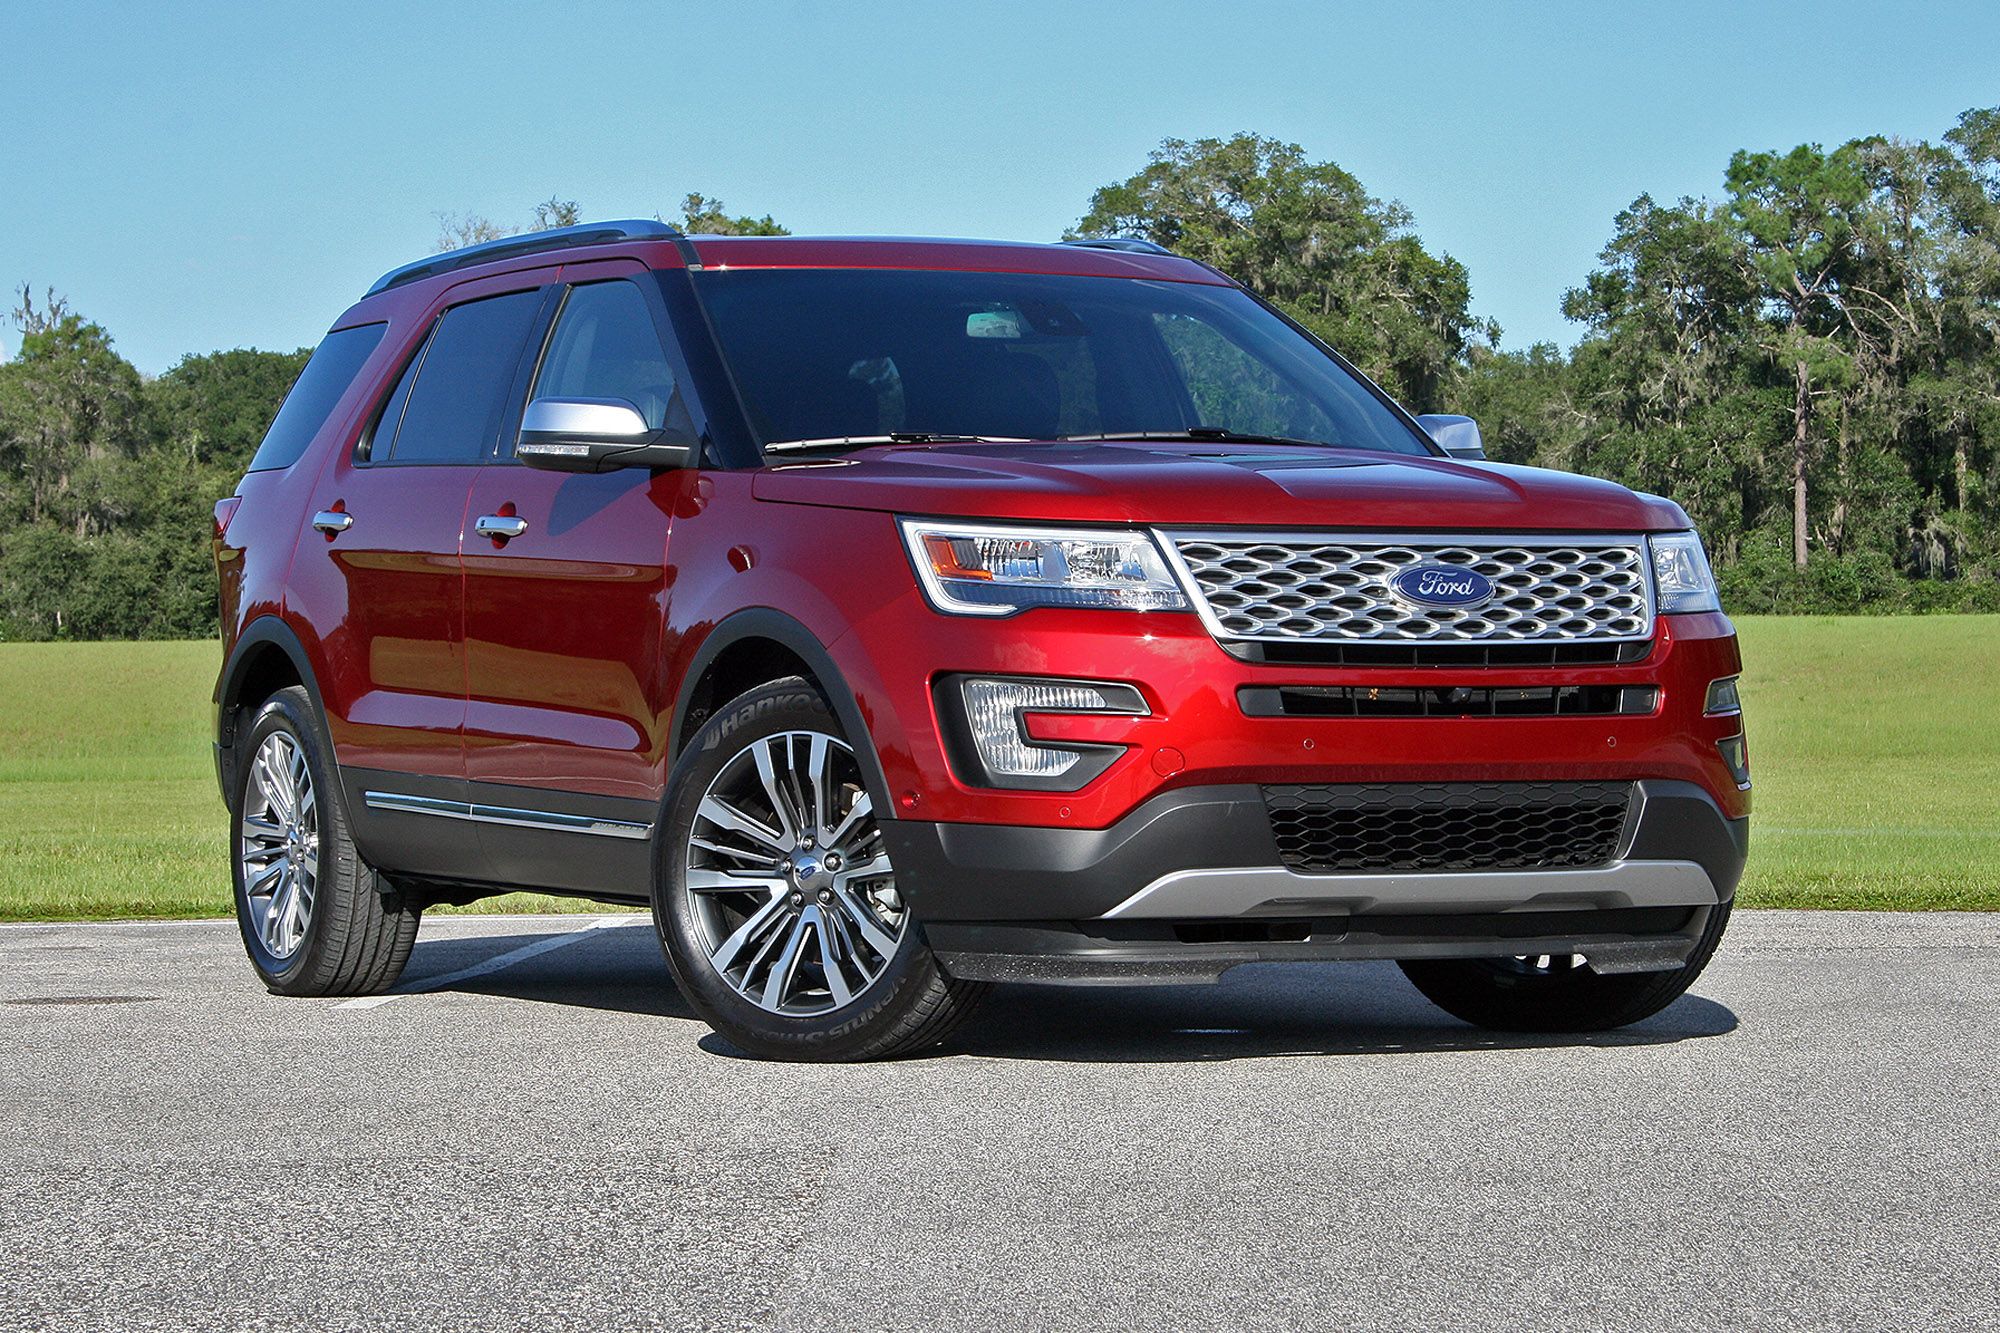 2018 - 2019 Ford Tries to Be a Big Player, Schedules Standalone Event for Debuting the 2020 Ford Explorer